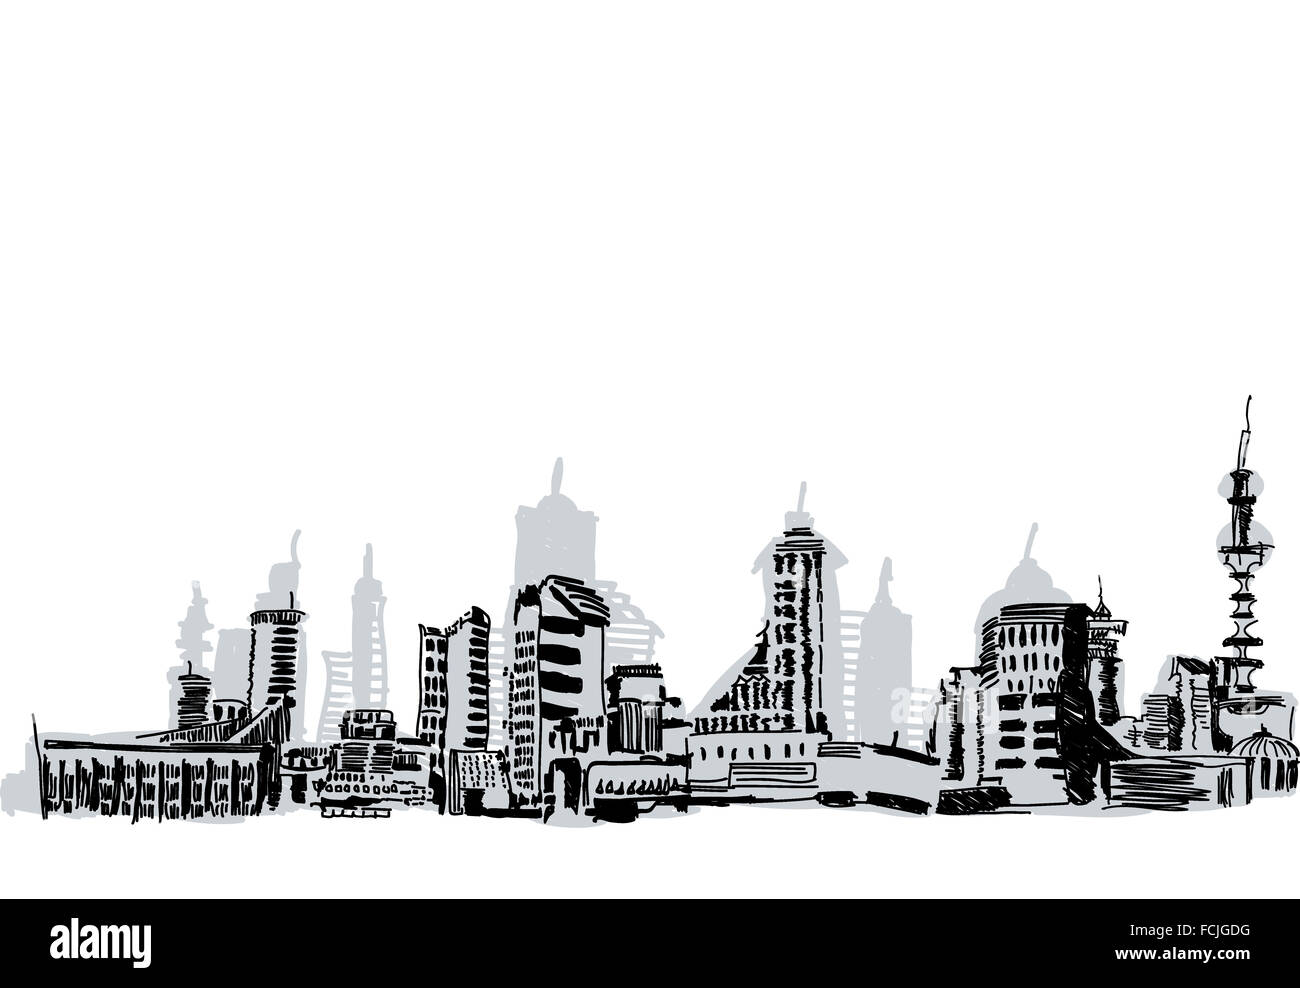 Background image with sketches of buildings on white backdrop Stock Photo